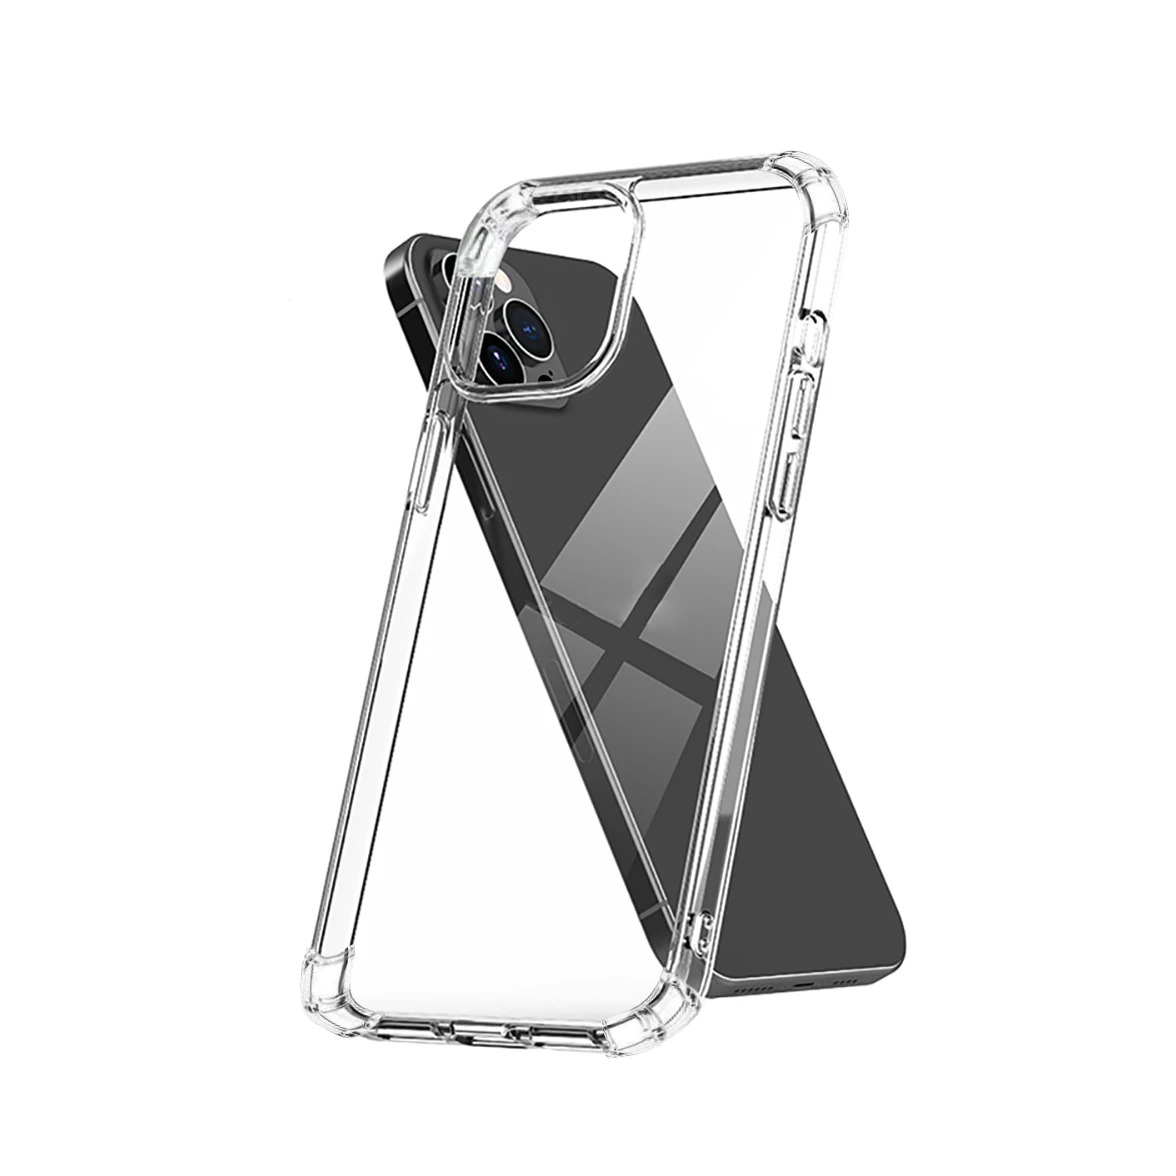 

Anti-knock Soft TPU Transparent Clear Phone Case Protect Cover Shockproof Soft Cases For iPhone 12 11 Pro Max 6 7 8 Plus X Xs